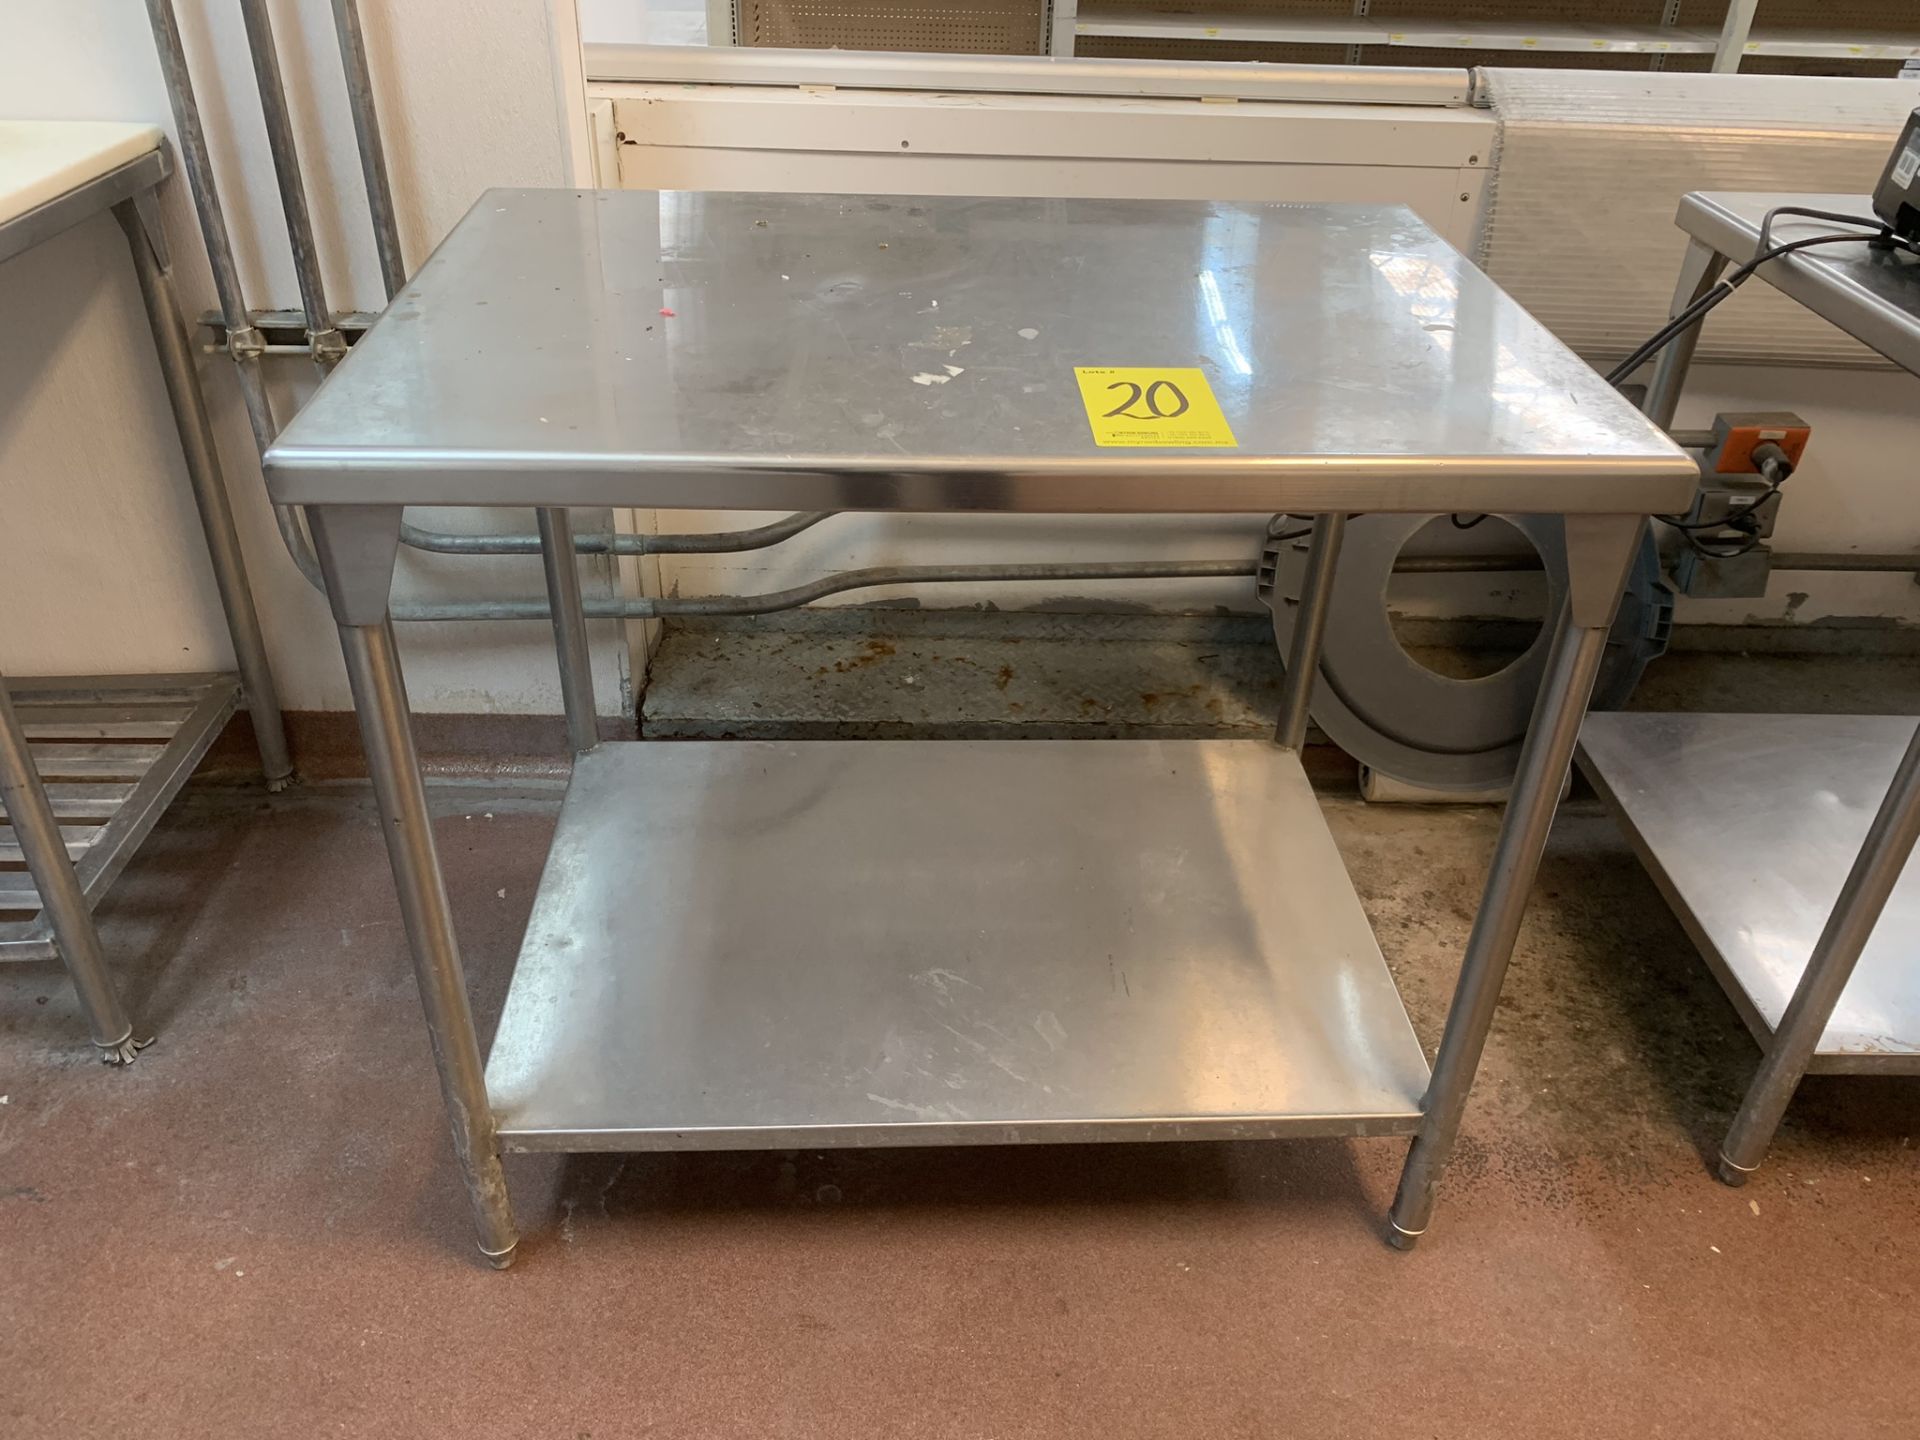 1 Stainless steel work table measures 1.00 x 0.70 x 0.90 mts